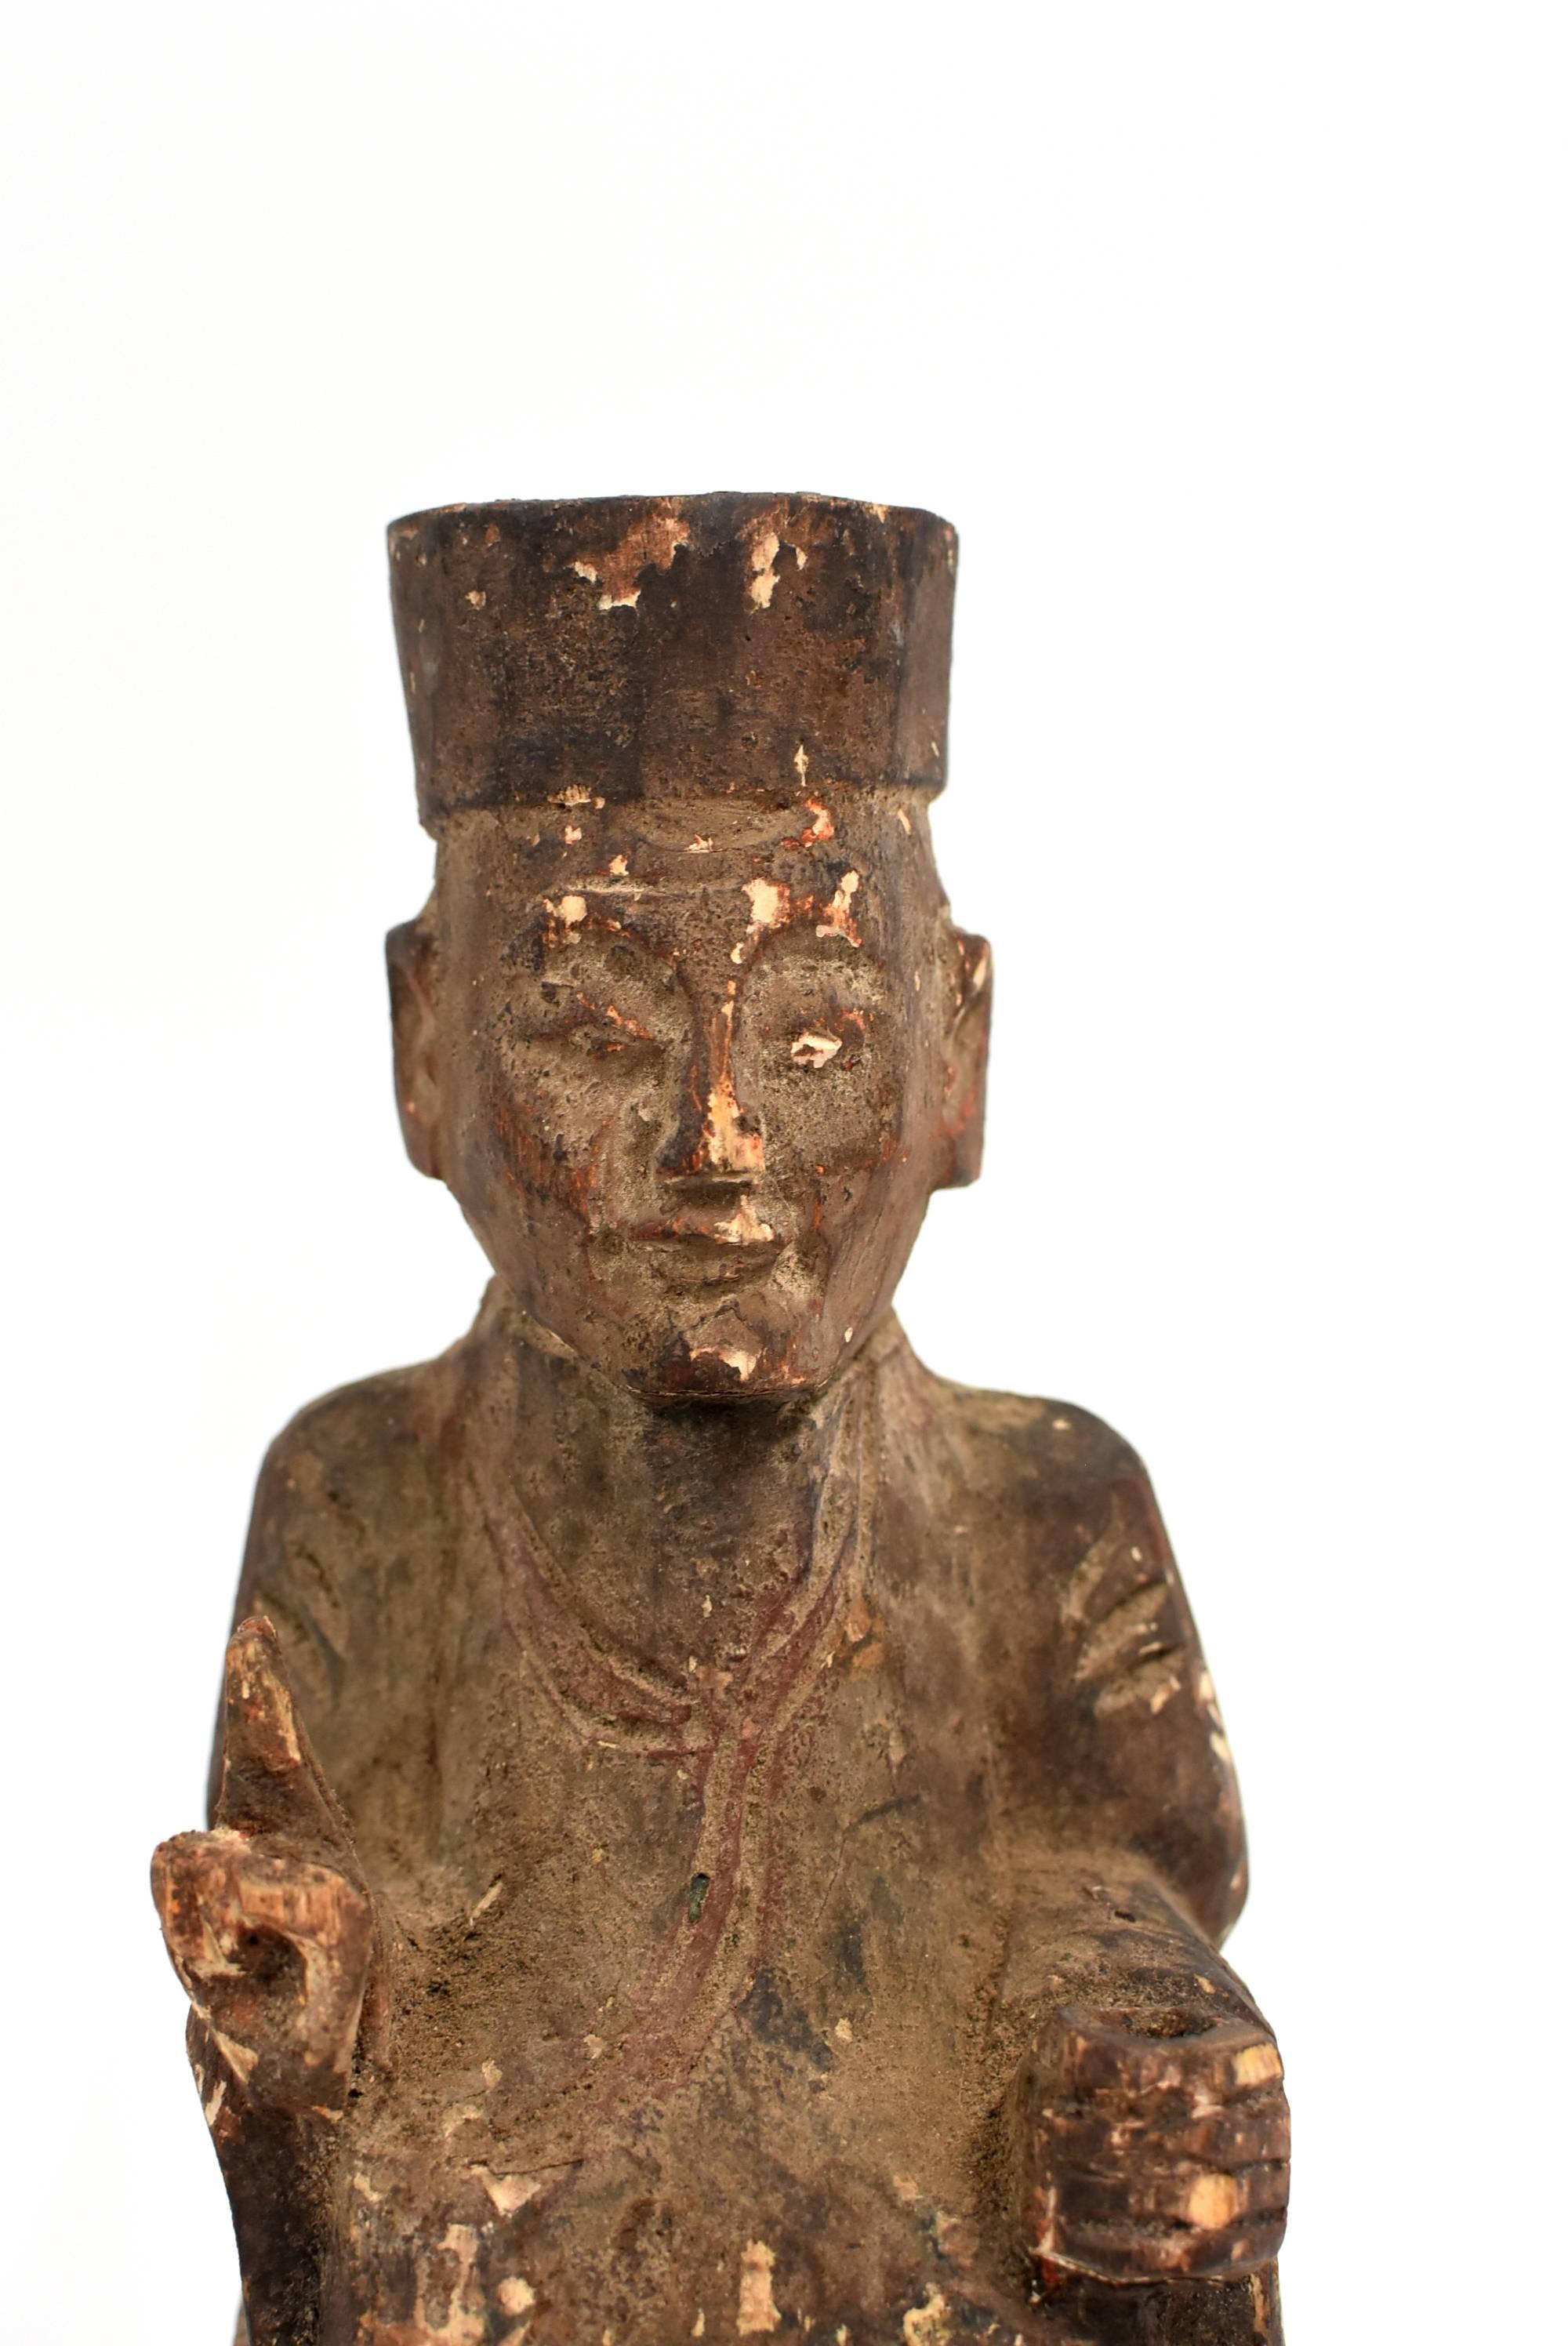 Very old solid wood statue depicts the Taoist Zen Master. He wears typical Tao robe and hat, with two fingers pointing up, and the left hand on his knee. Such a mudra symbolizes the connection of heaven and earth which is consistent with the Taoist